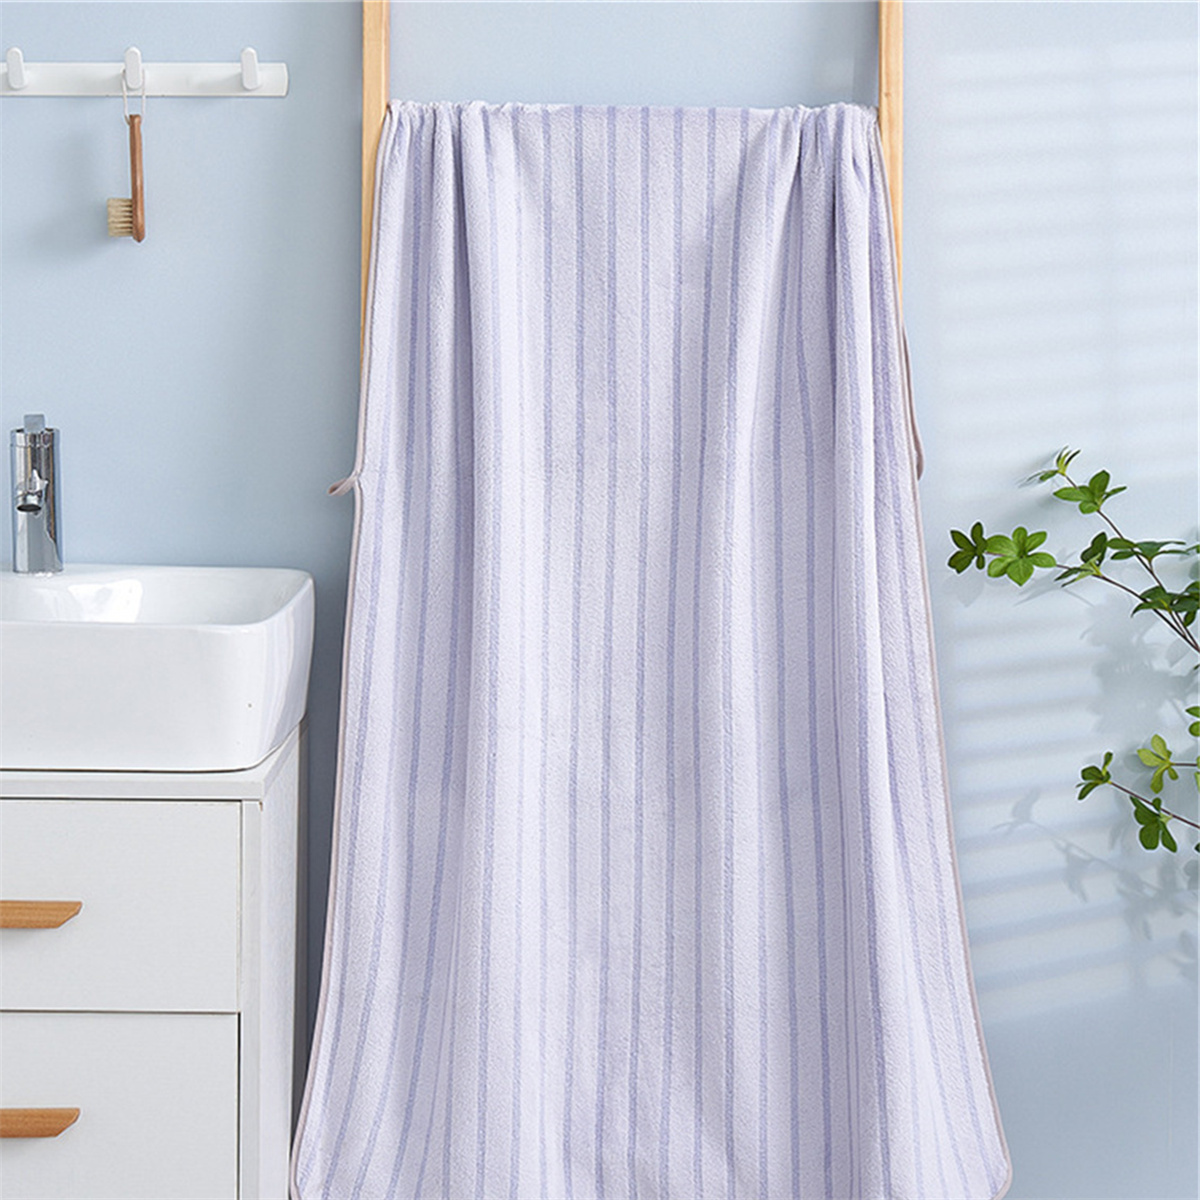 1pc Super Large Solid Color Towel/bath Towel In Modern & Simple